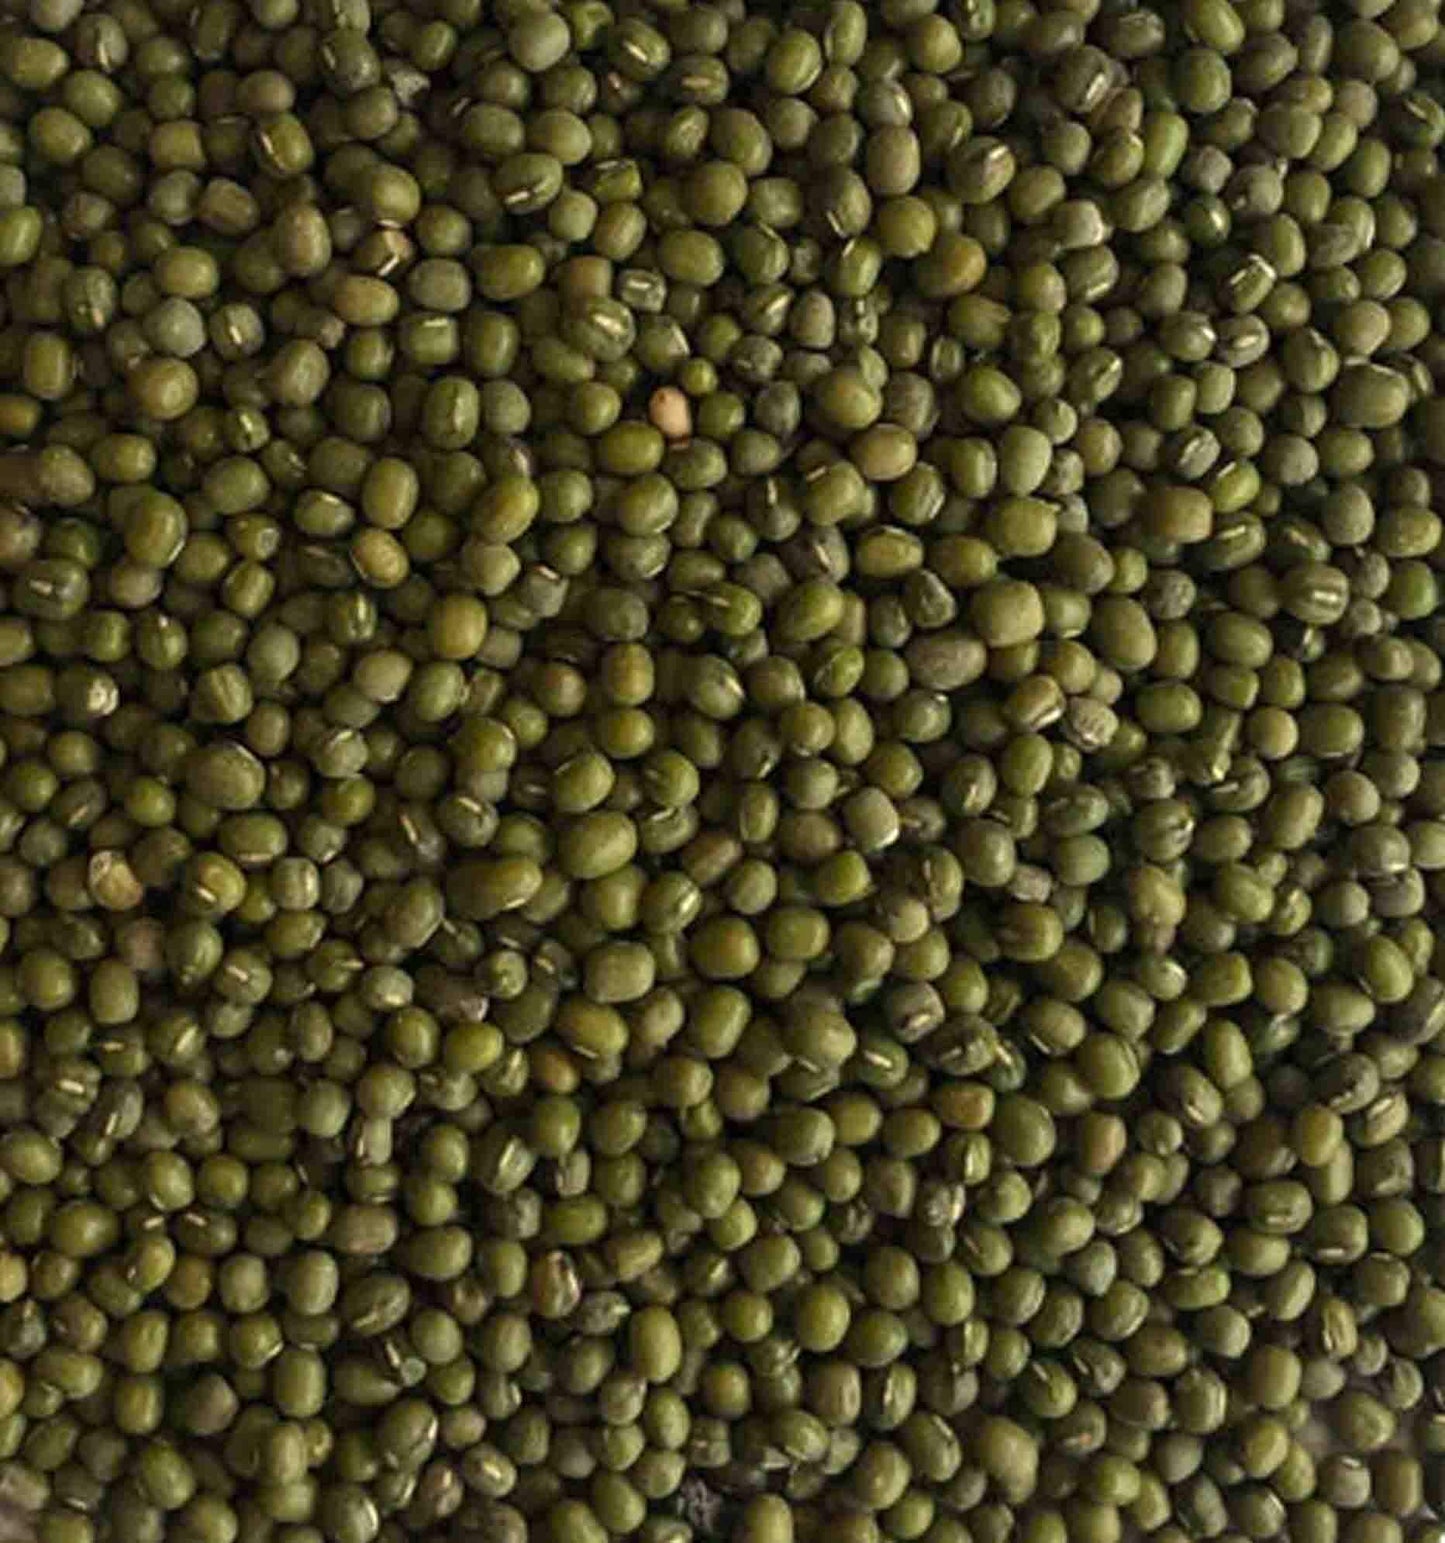 Mung Beans for budgies